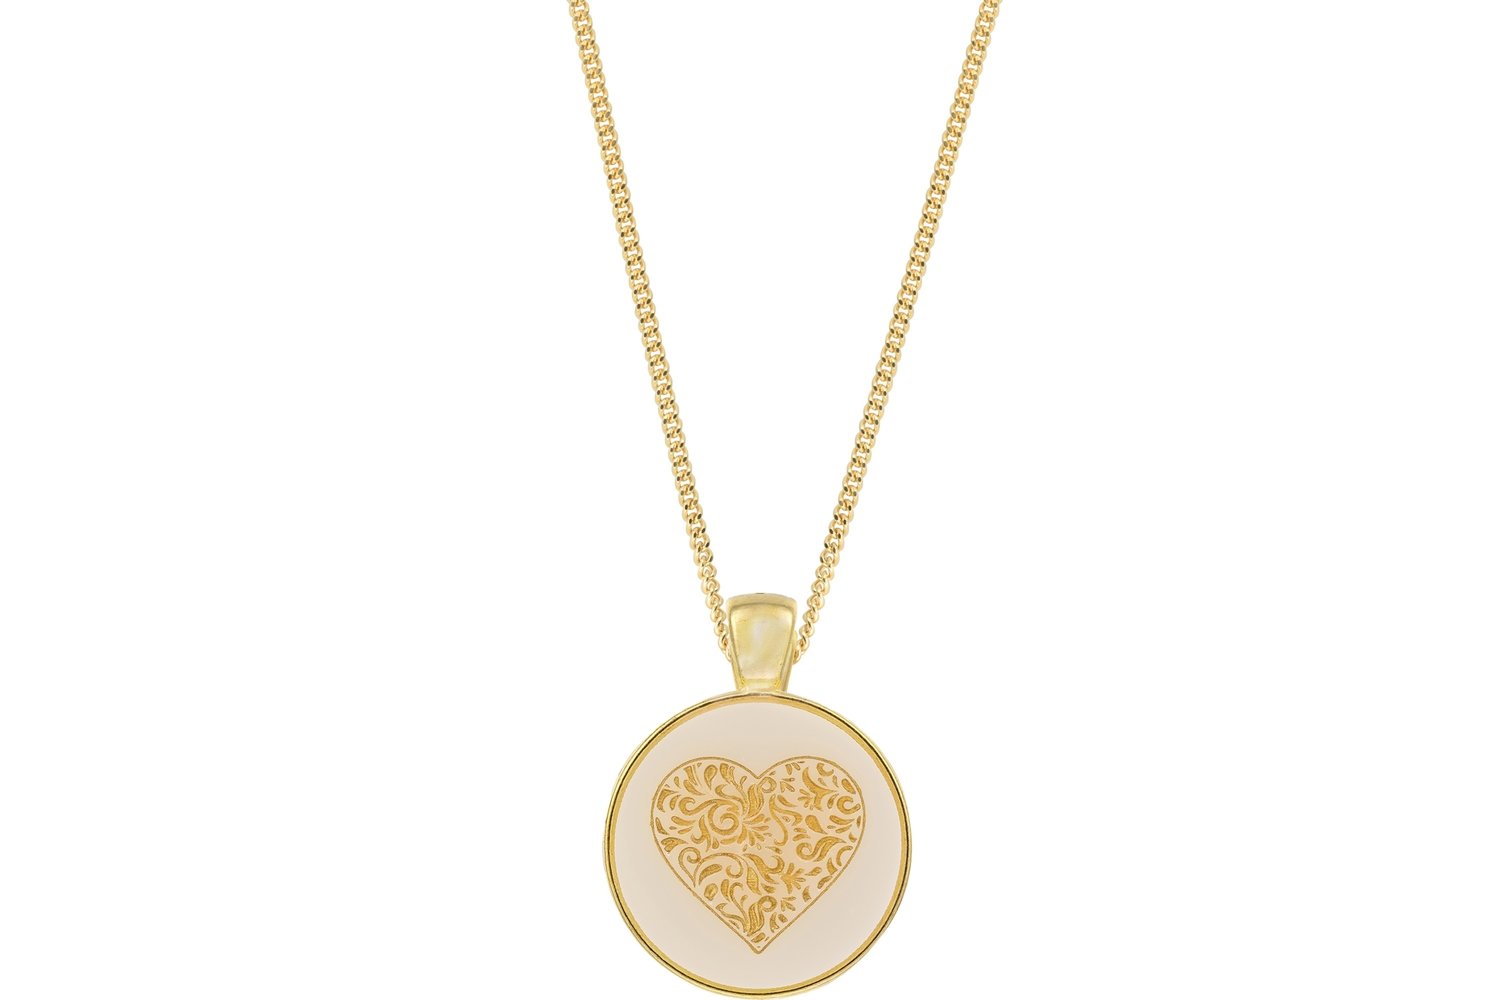 Heart Scroll Pendant Classic Style with Bezel on Chain Necklace